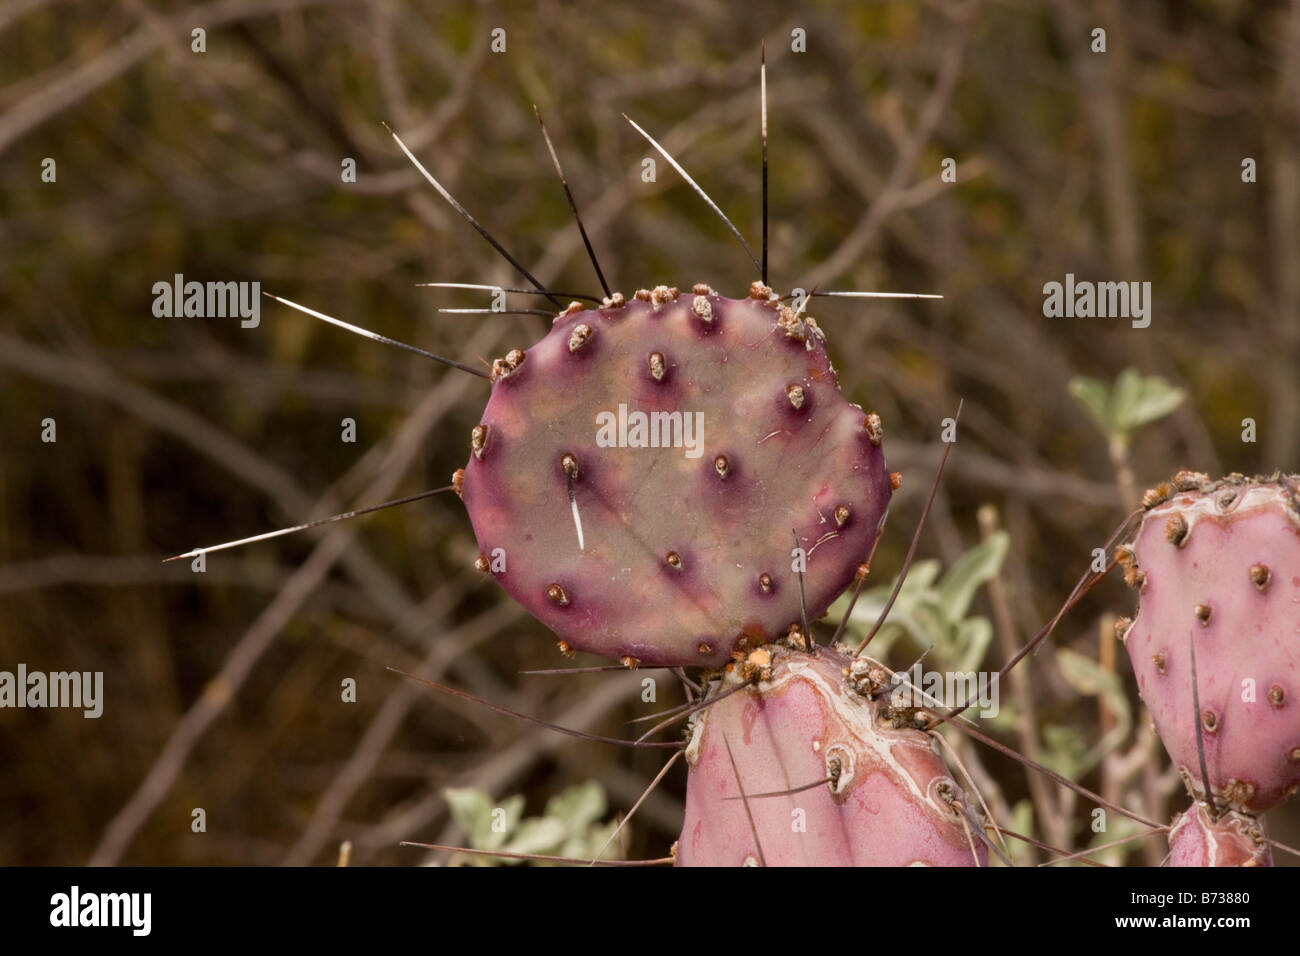 Long-spined Prickly pear Opuntia macrocentra a form of cactus Arizona Stock Photo